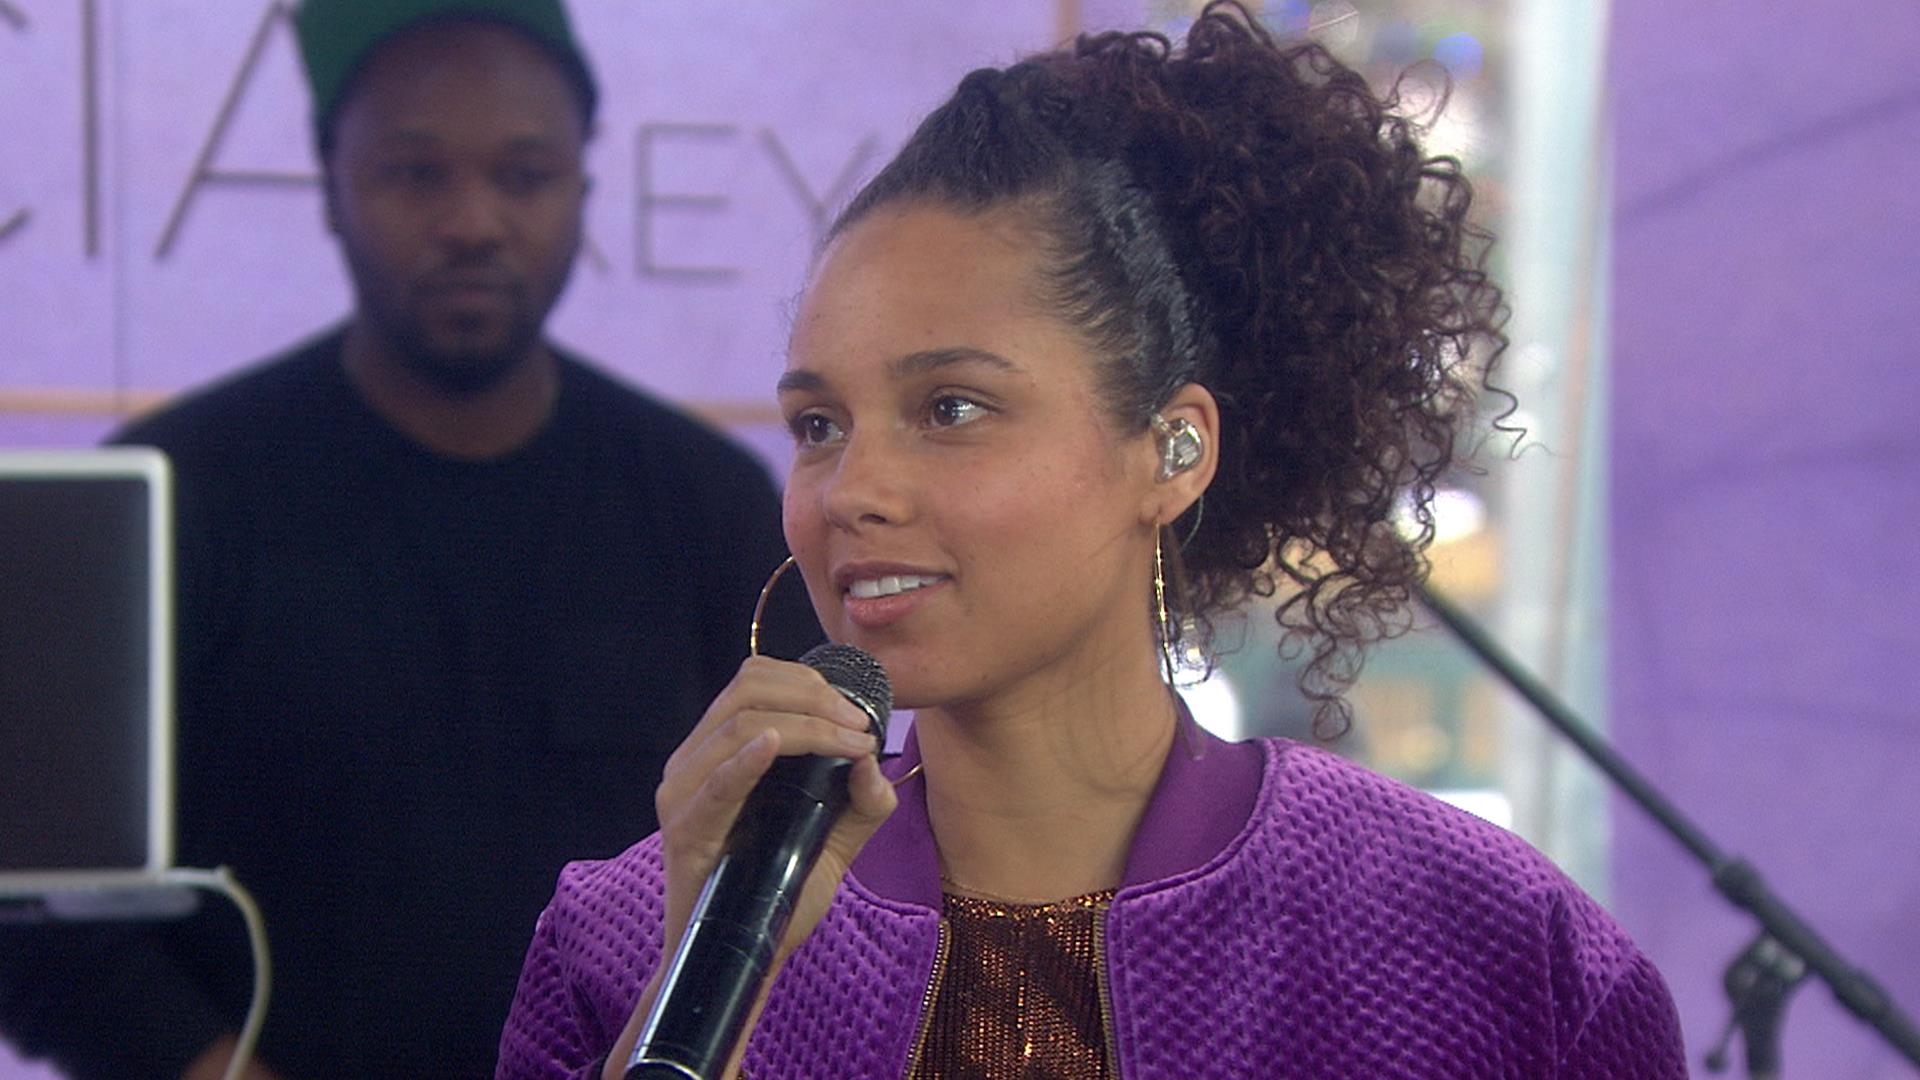 Alicia Keys: My new album 'Here' is 'an important body of work for me'